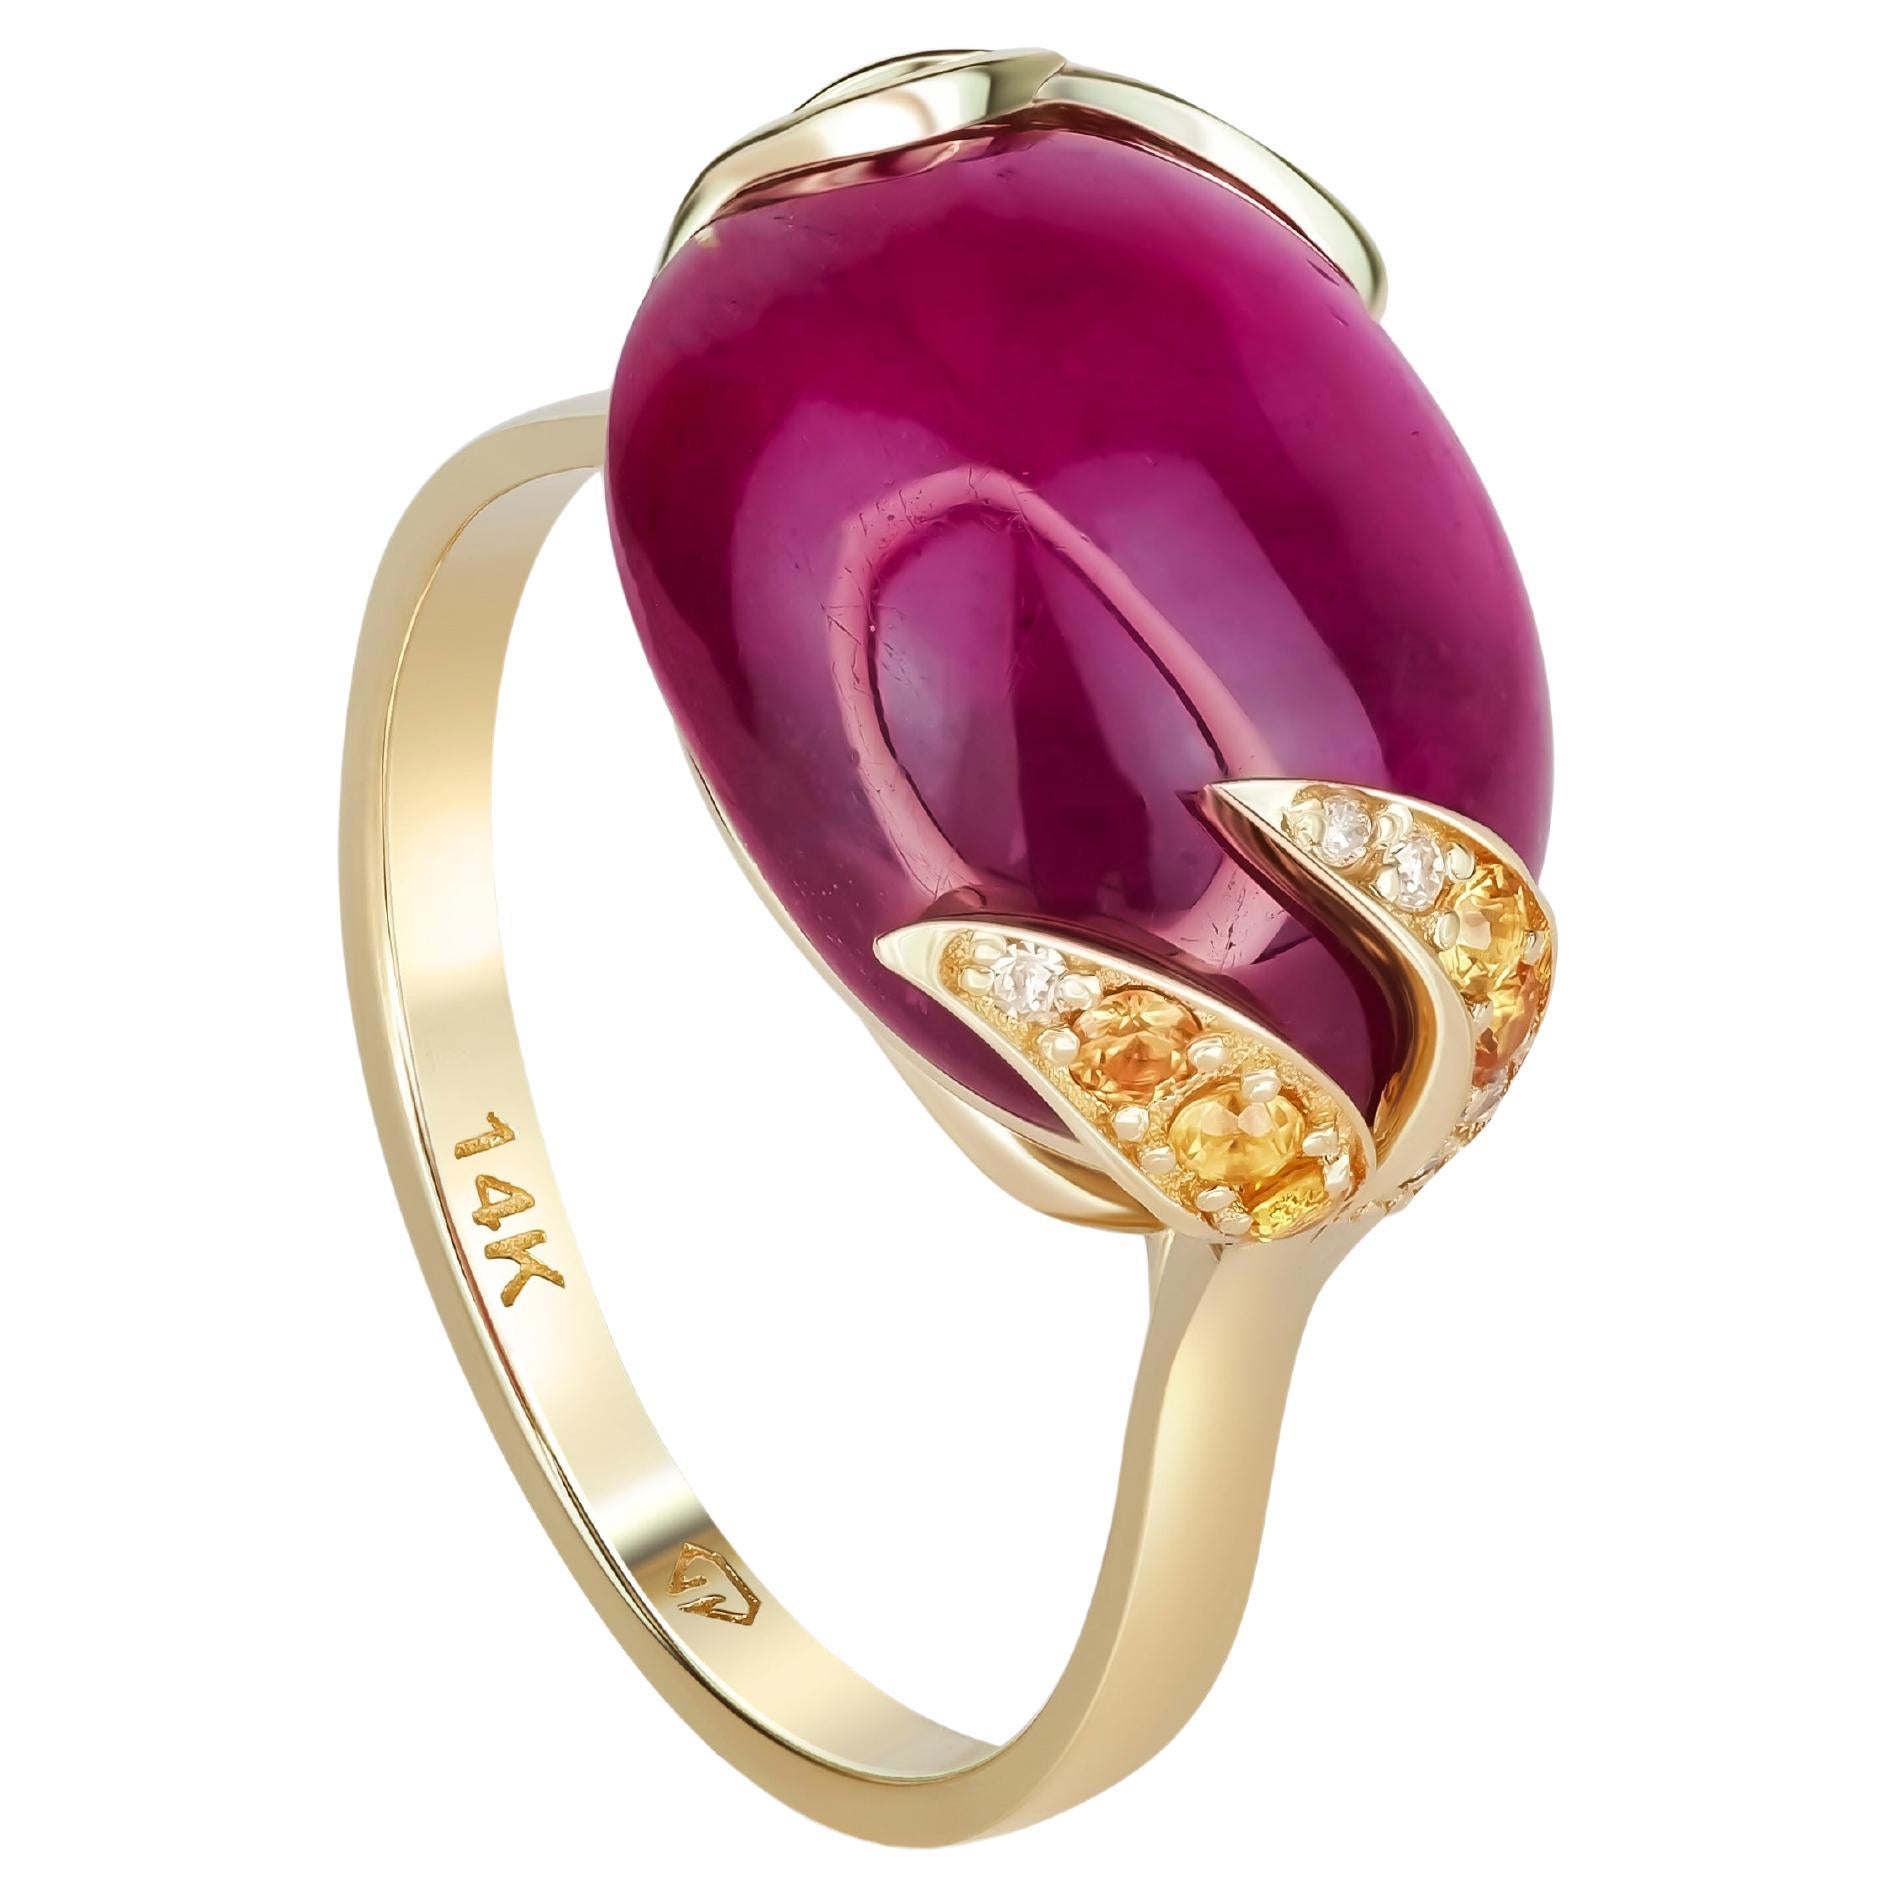 14 Karat Gold Ring with Cabochon Ruby and Diamonds. July birthstone ruby ring.